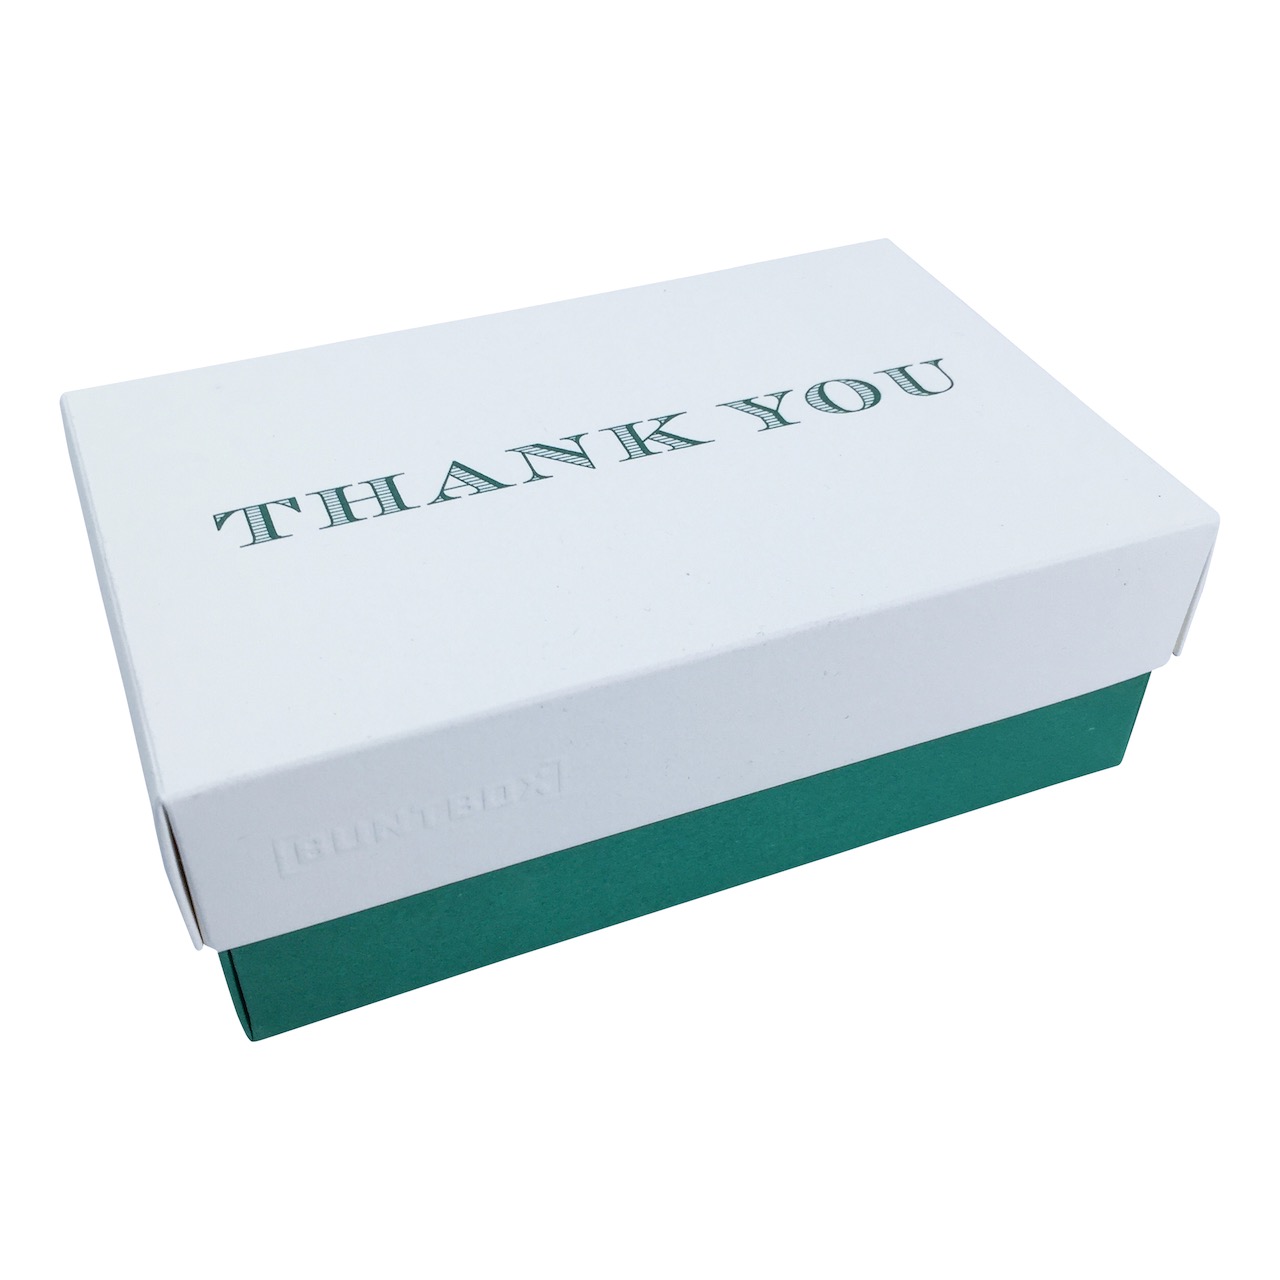 Fine Paper Edition Buntbox Champagne - Bordeaux 'Thank You' - Red